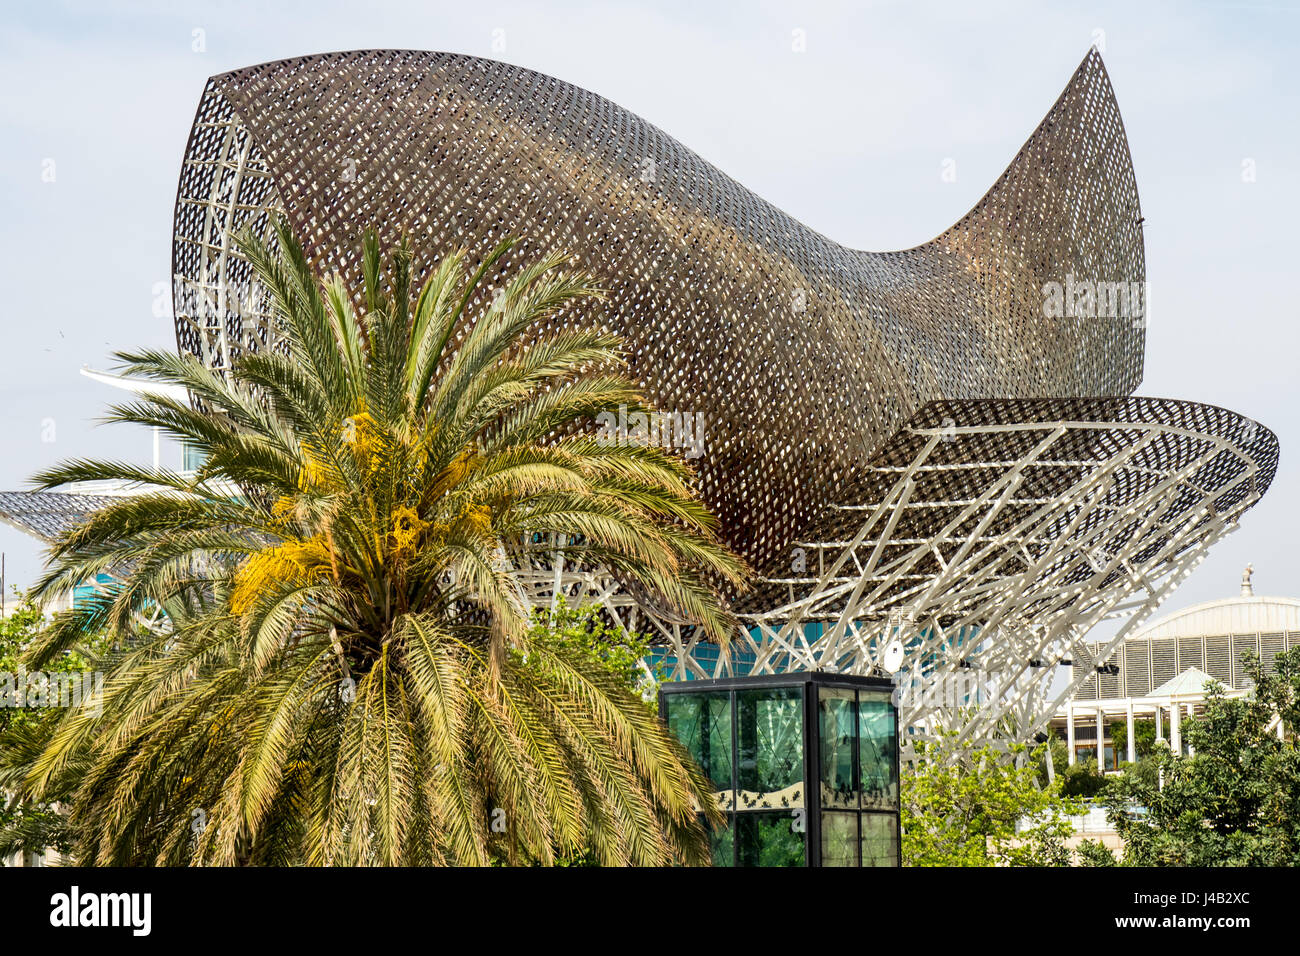 Architect Frank Gehry's fish sculpture, El Peix, in Barcelona, Spain. Stock Photo